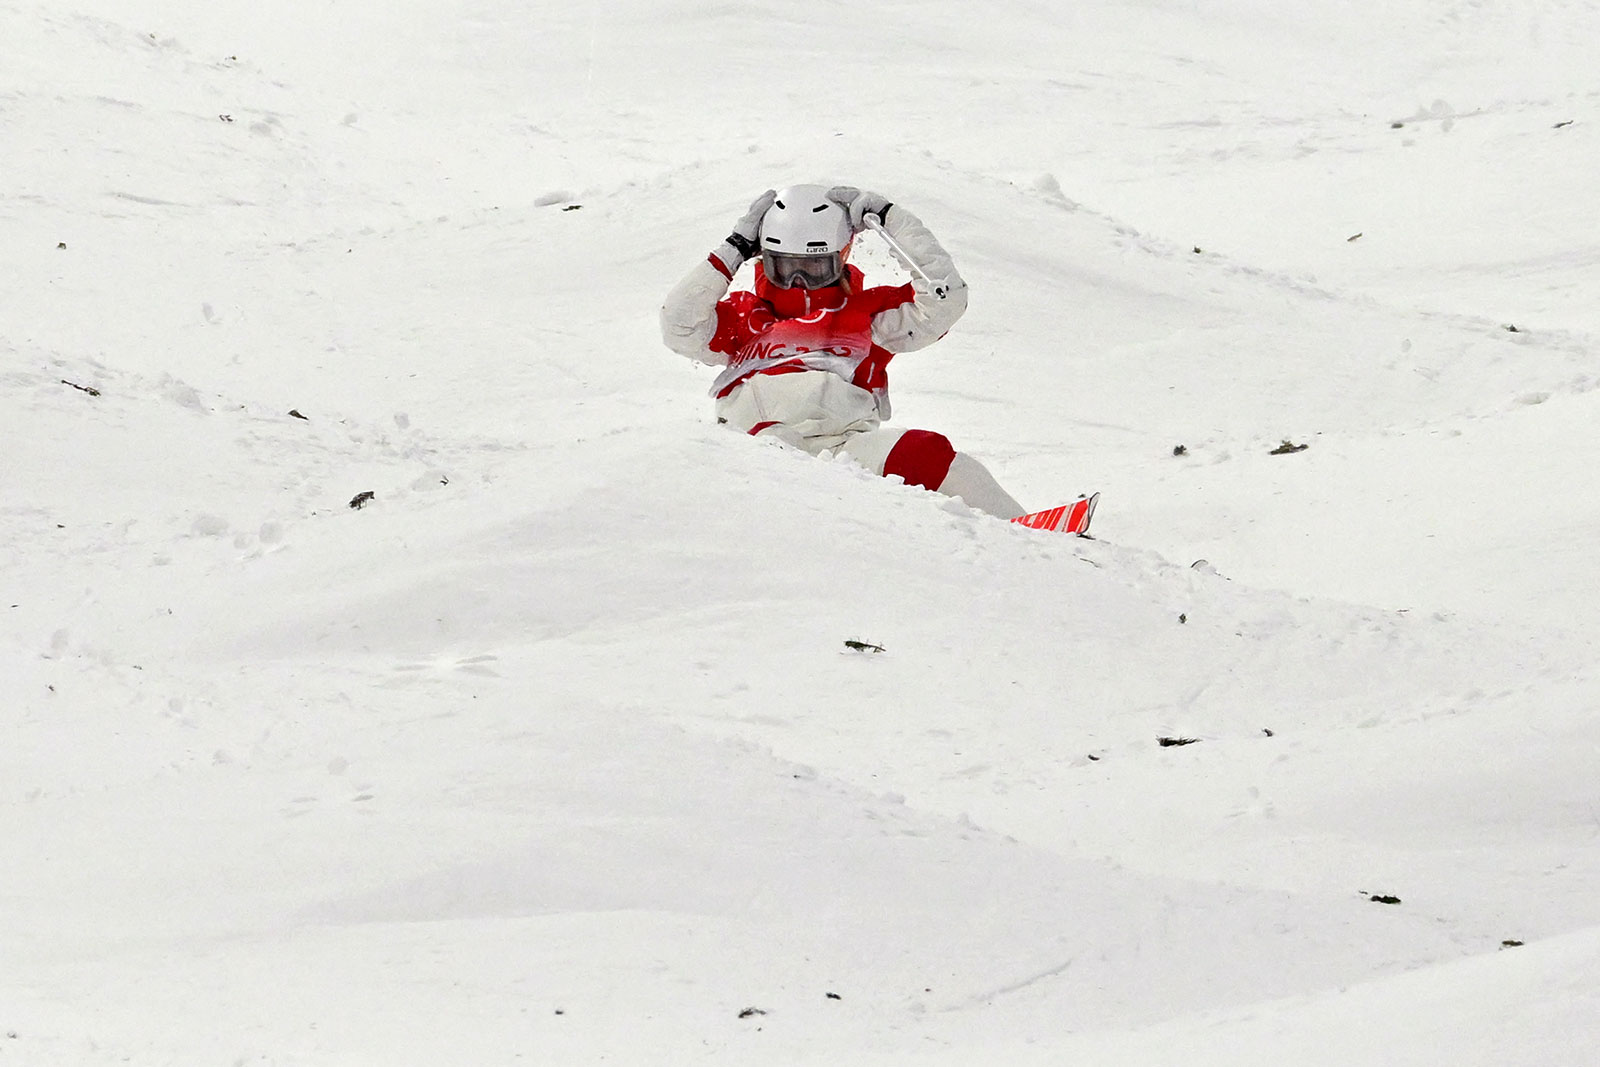 Canada's Justine Dufour-Lapointe crashes out during the women's moguls on February 6.